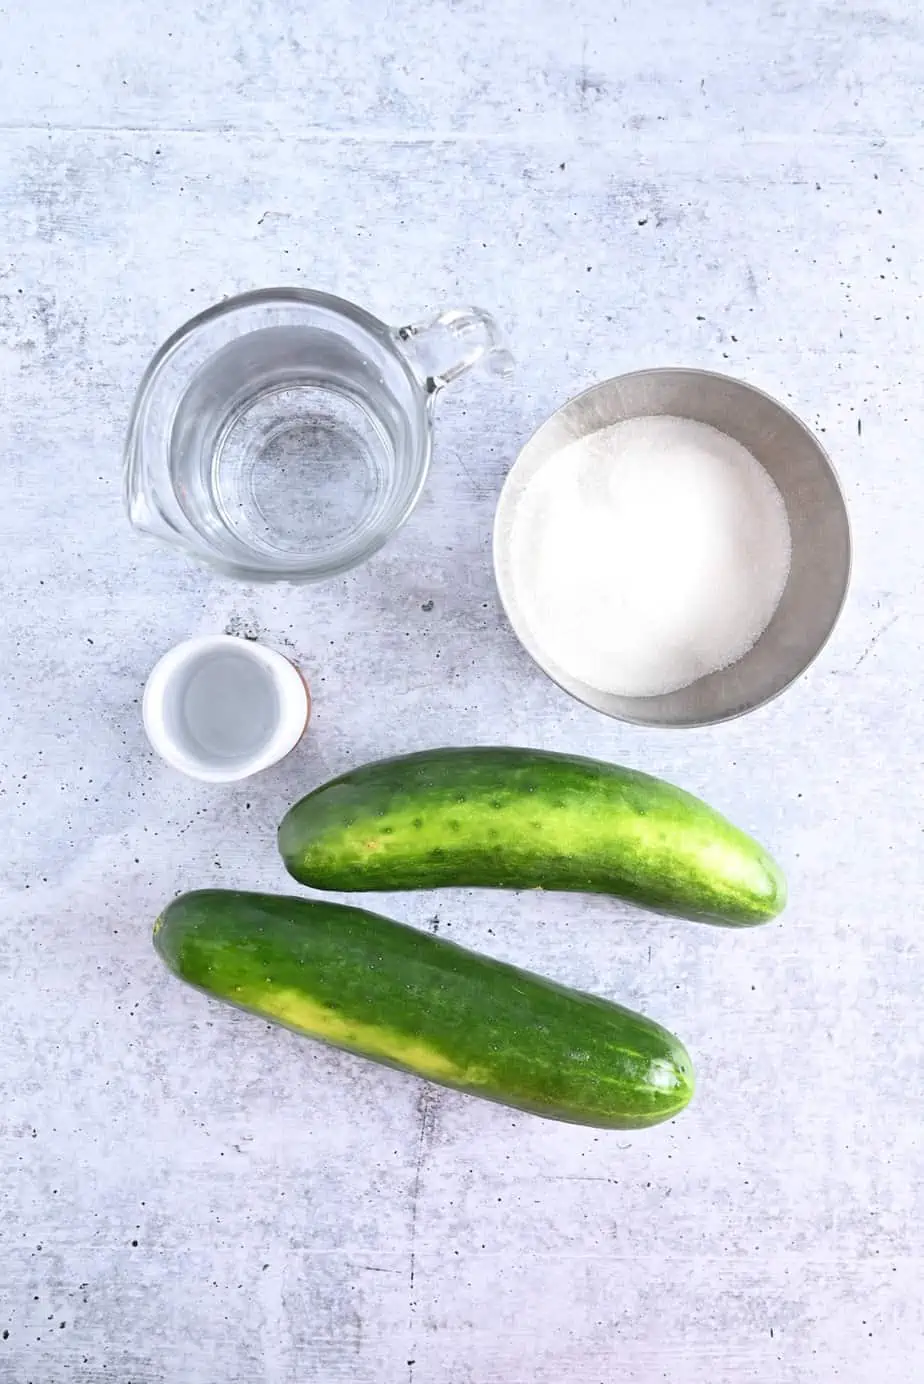 Ingredients for pickled cucumbers arranged on a concrete countertop.